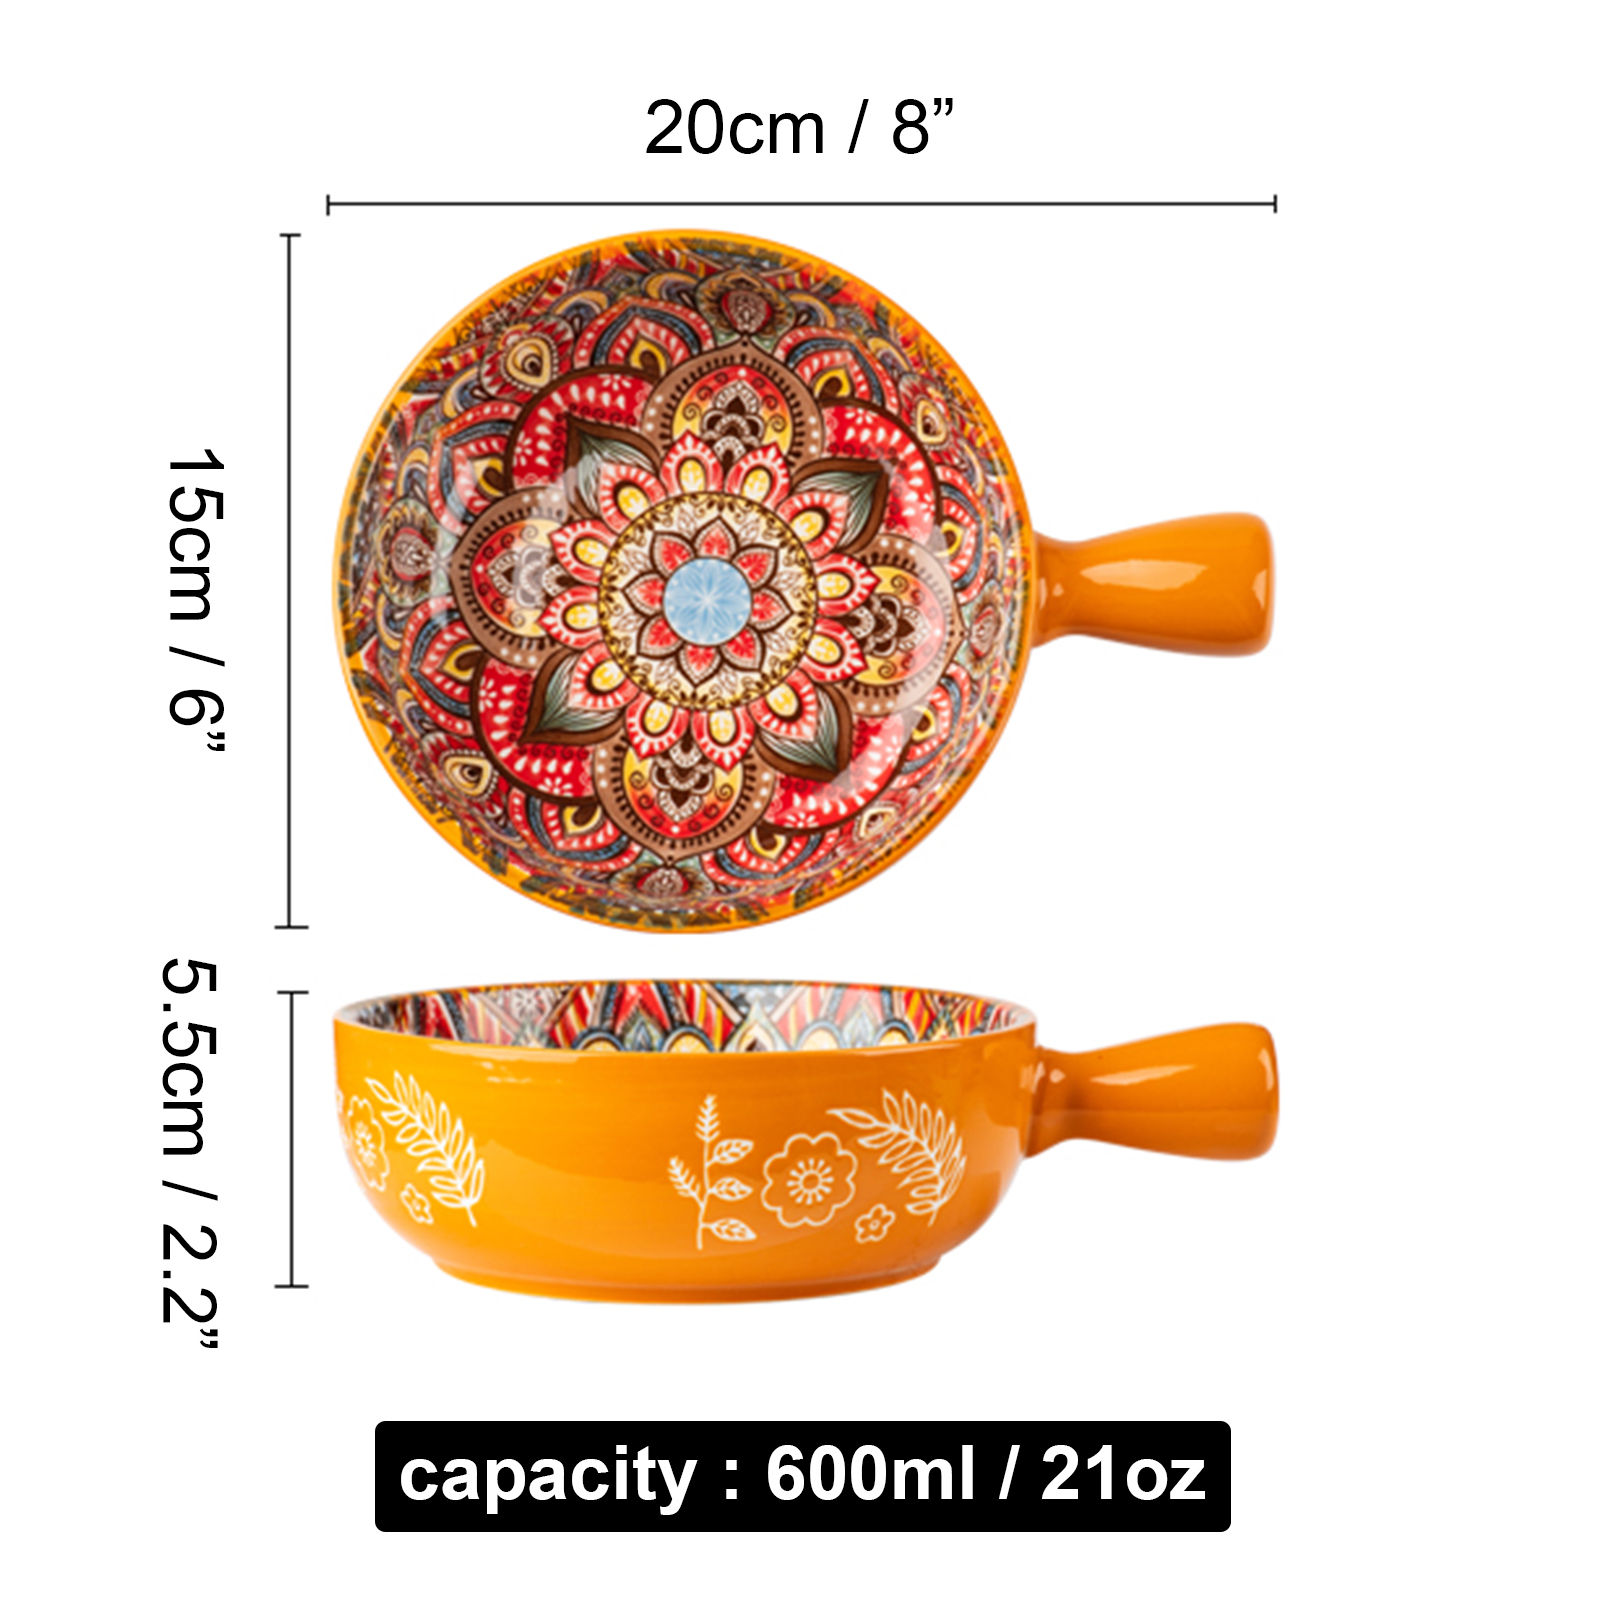 Qeeadeea Ceramic Soup Bowl With Handle 600ml, Single Shallow Bowl, Small Ramen Bowl, Microwave And Oven Safe-Orange-20x15x5.5cm - image 2 of 7